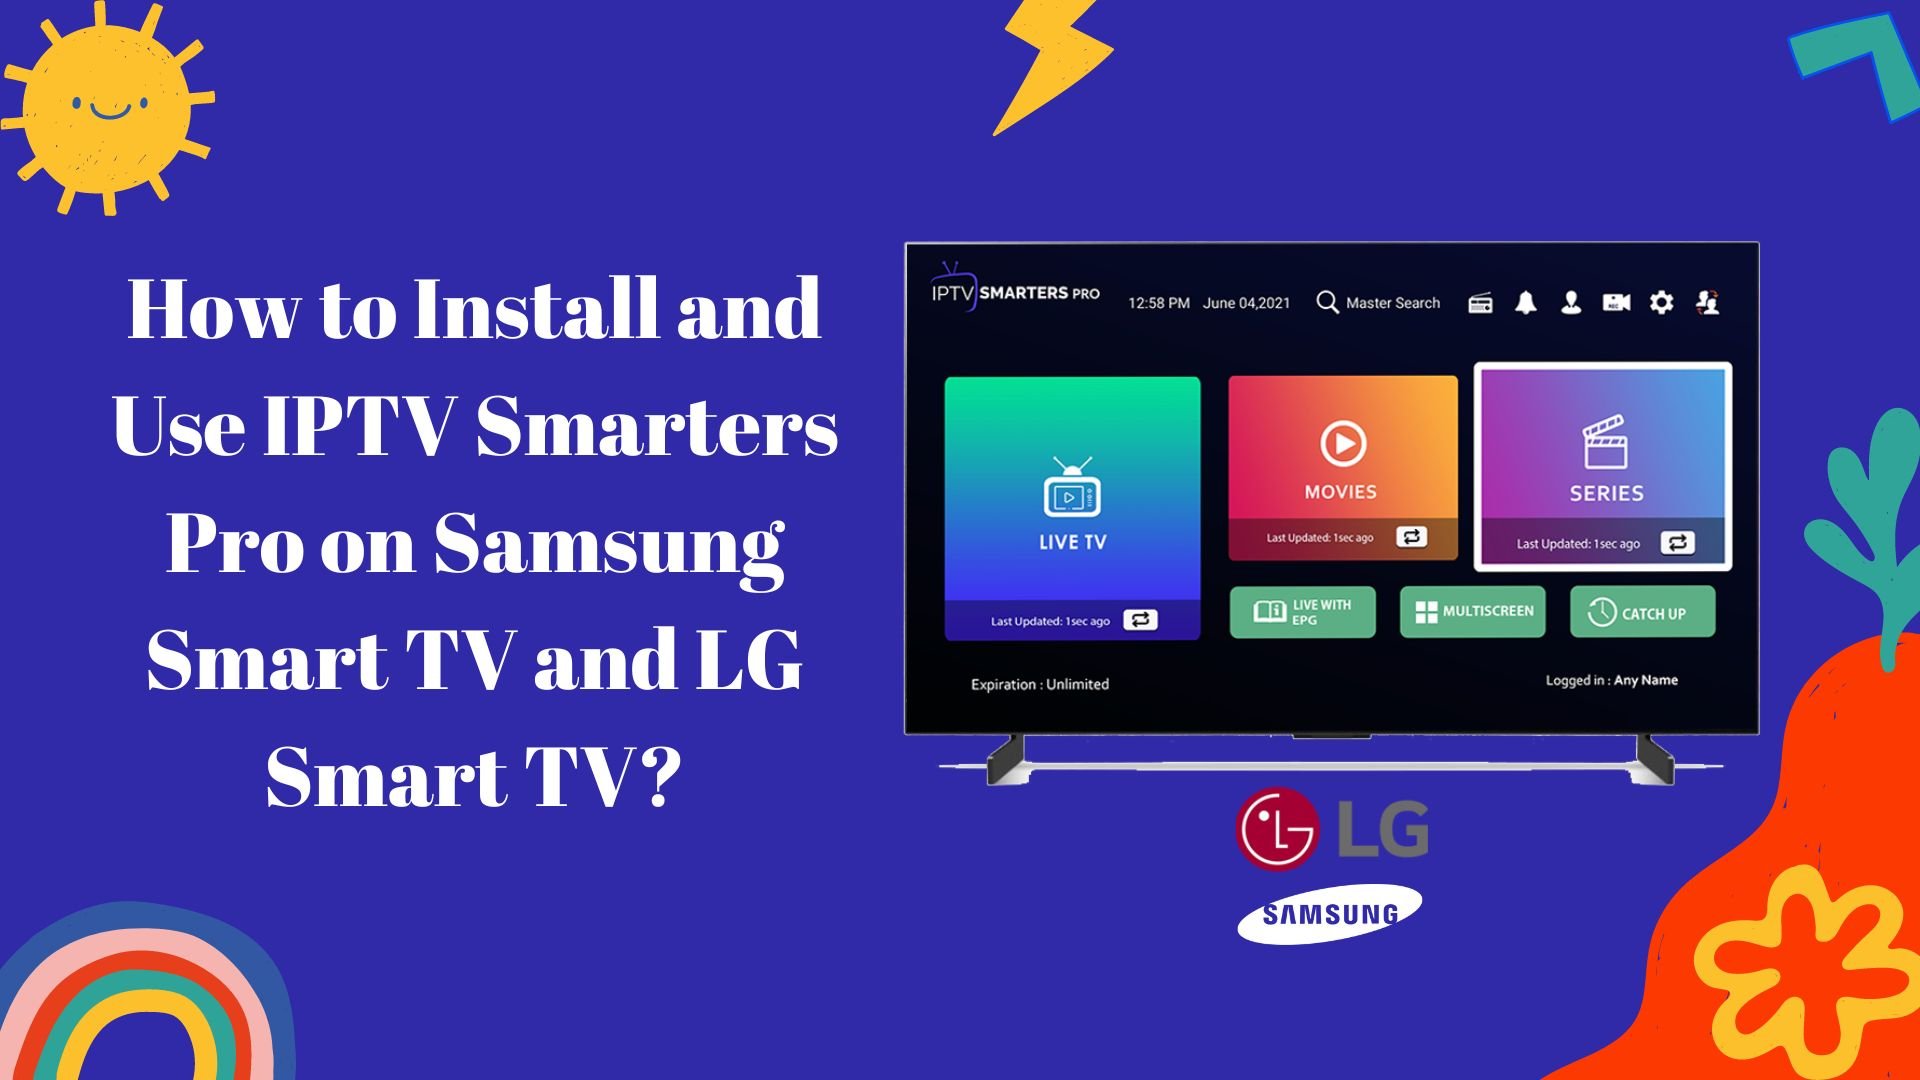 How to Install and Use IPTV Smarters Pro on Samsung Smart TV and LG Smart TV